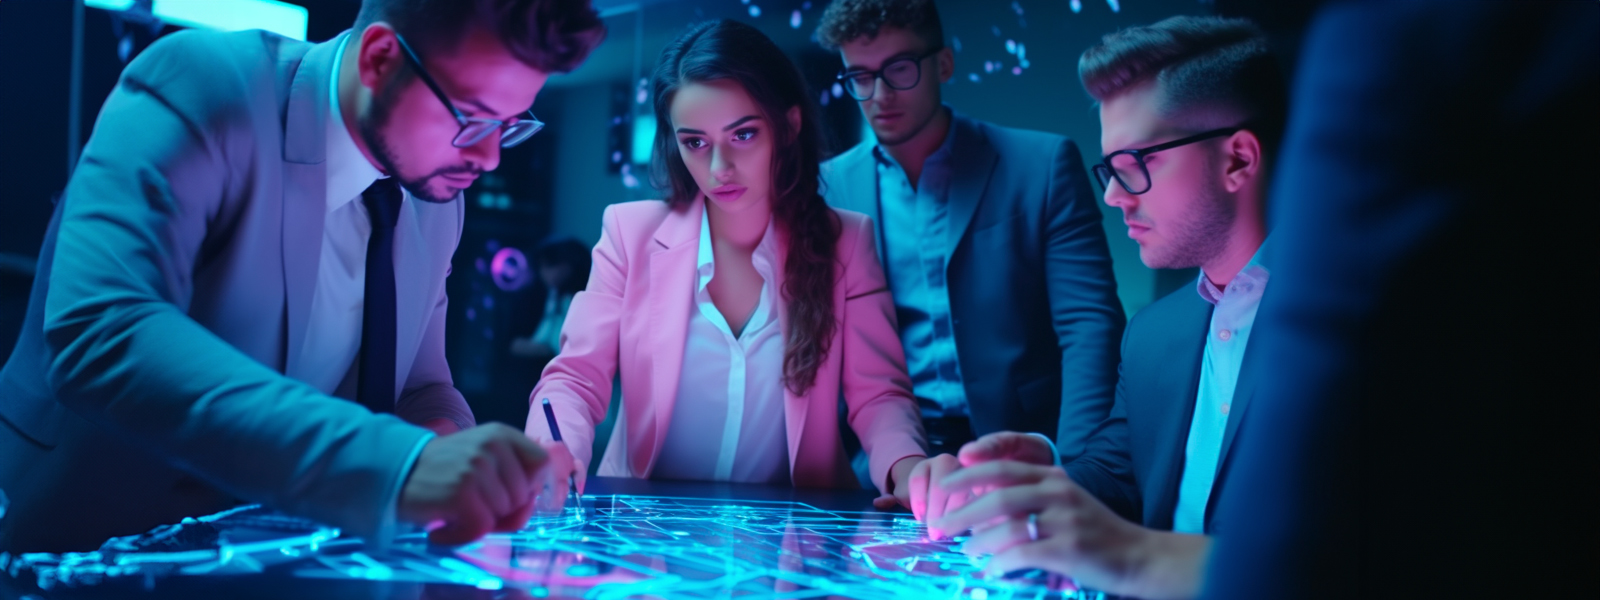 A group of people examine data on a holographic table.